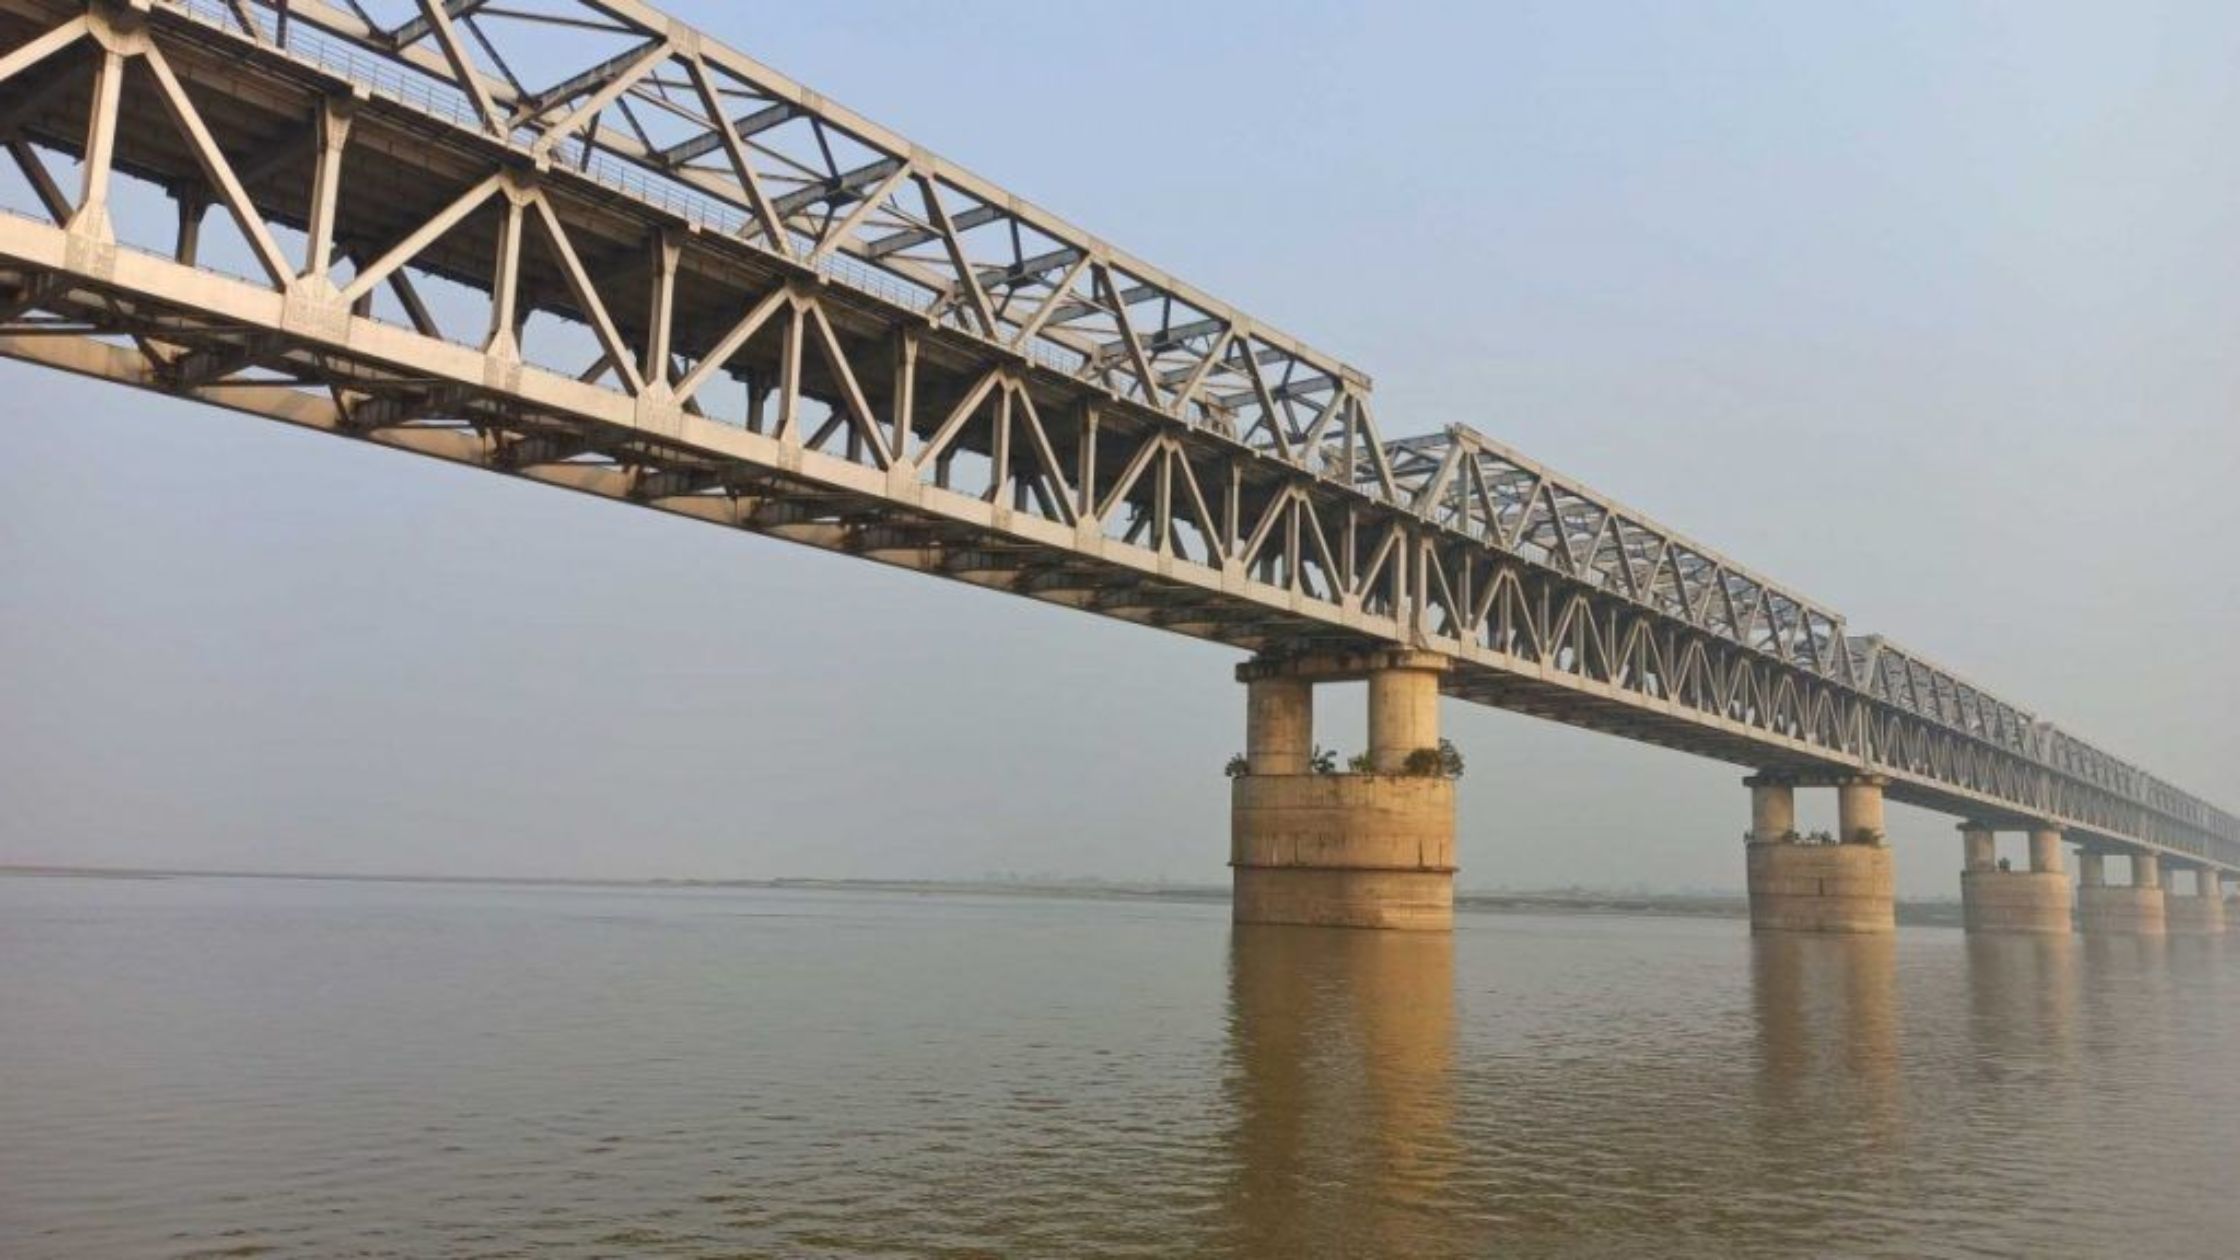 A magnificent bridge will be built on the river Ganga in Bihar